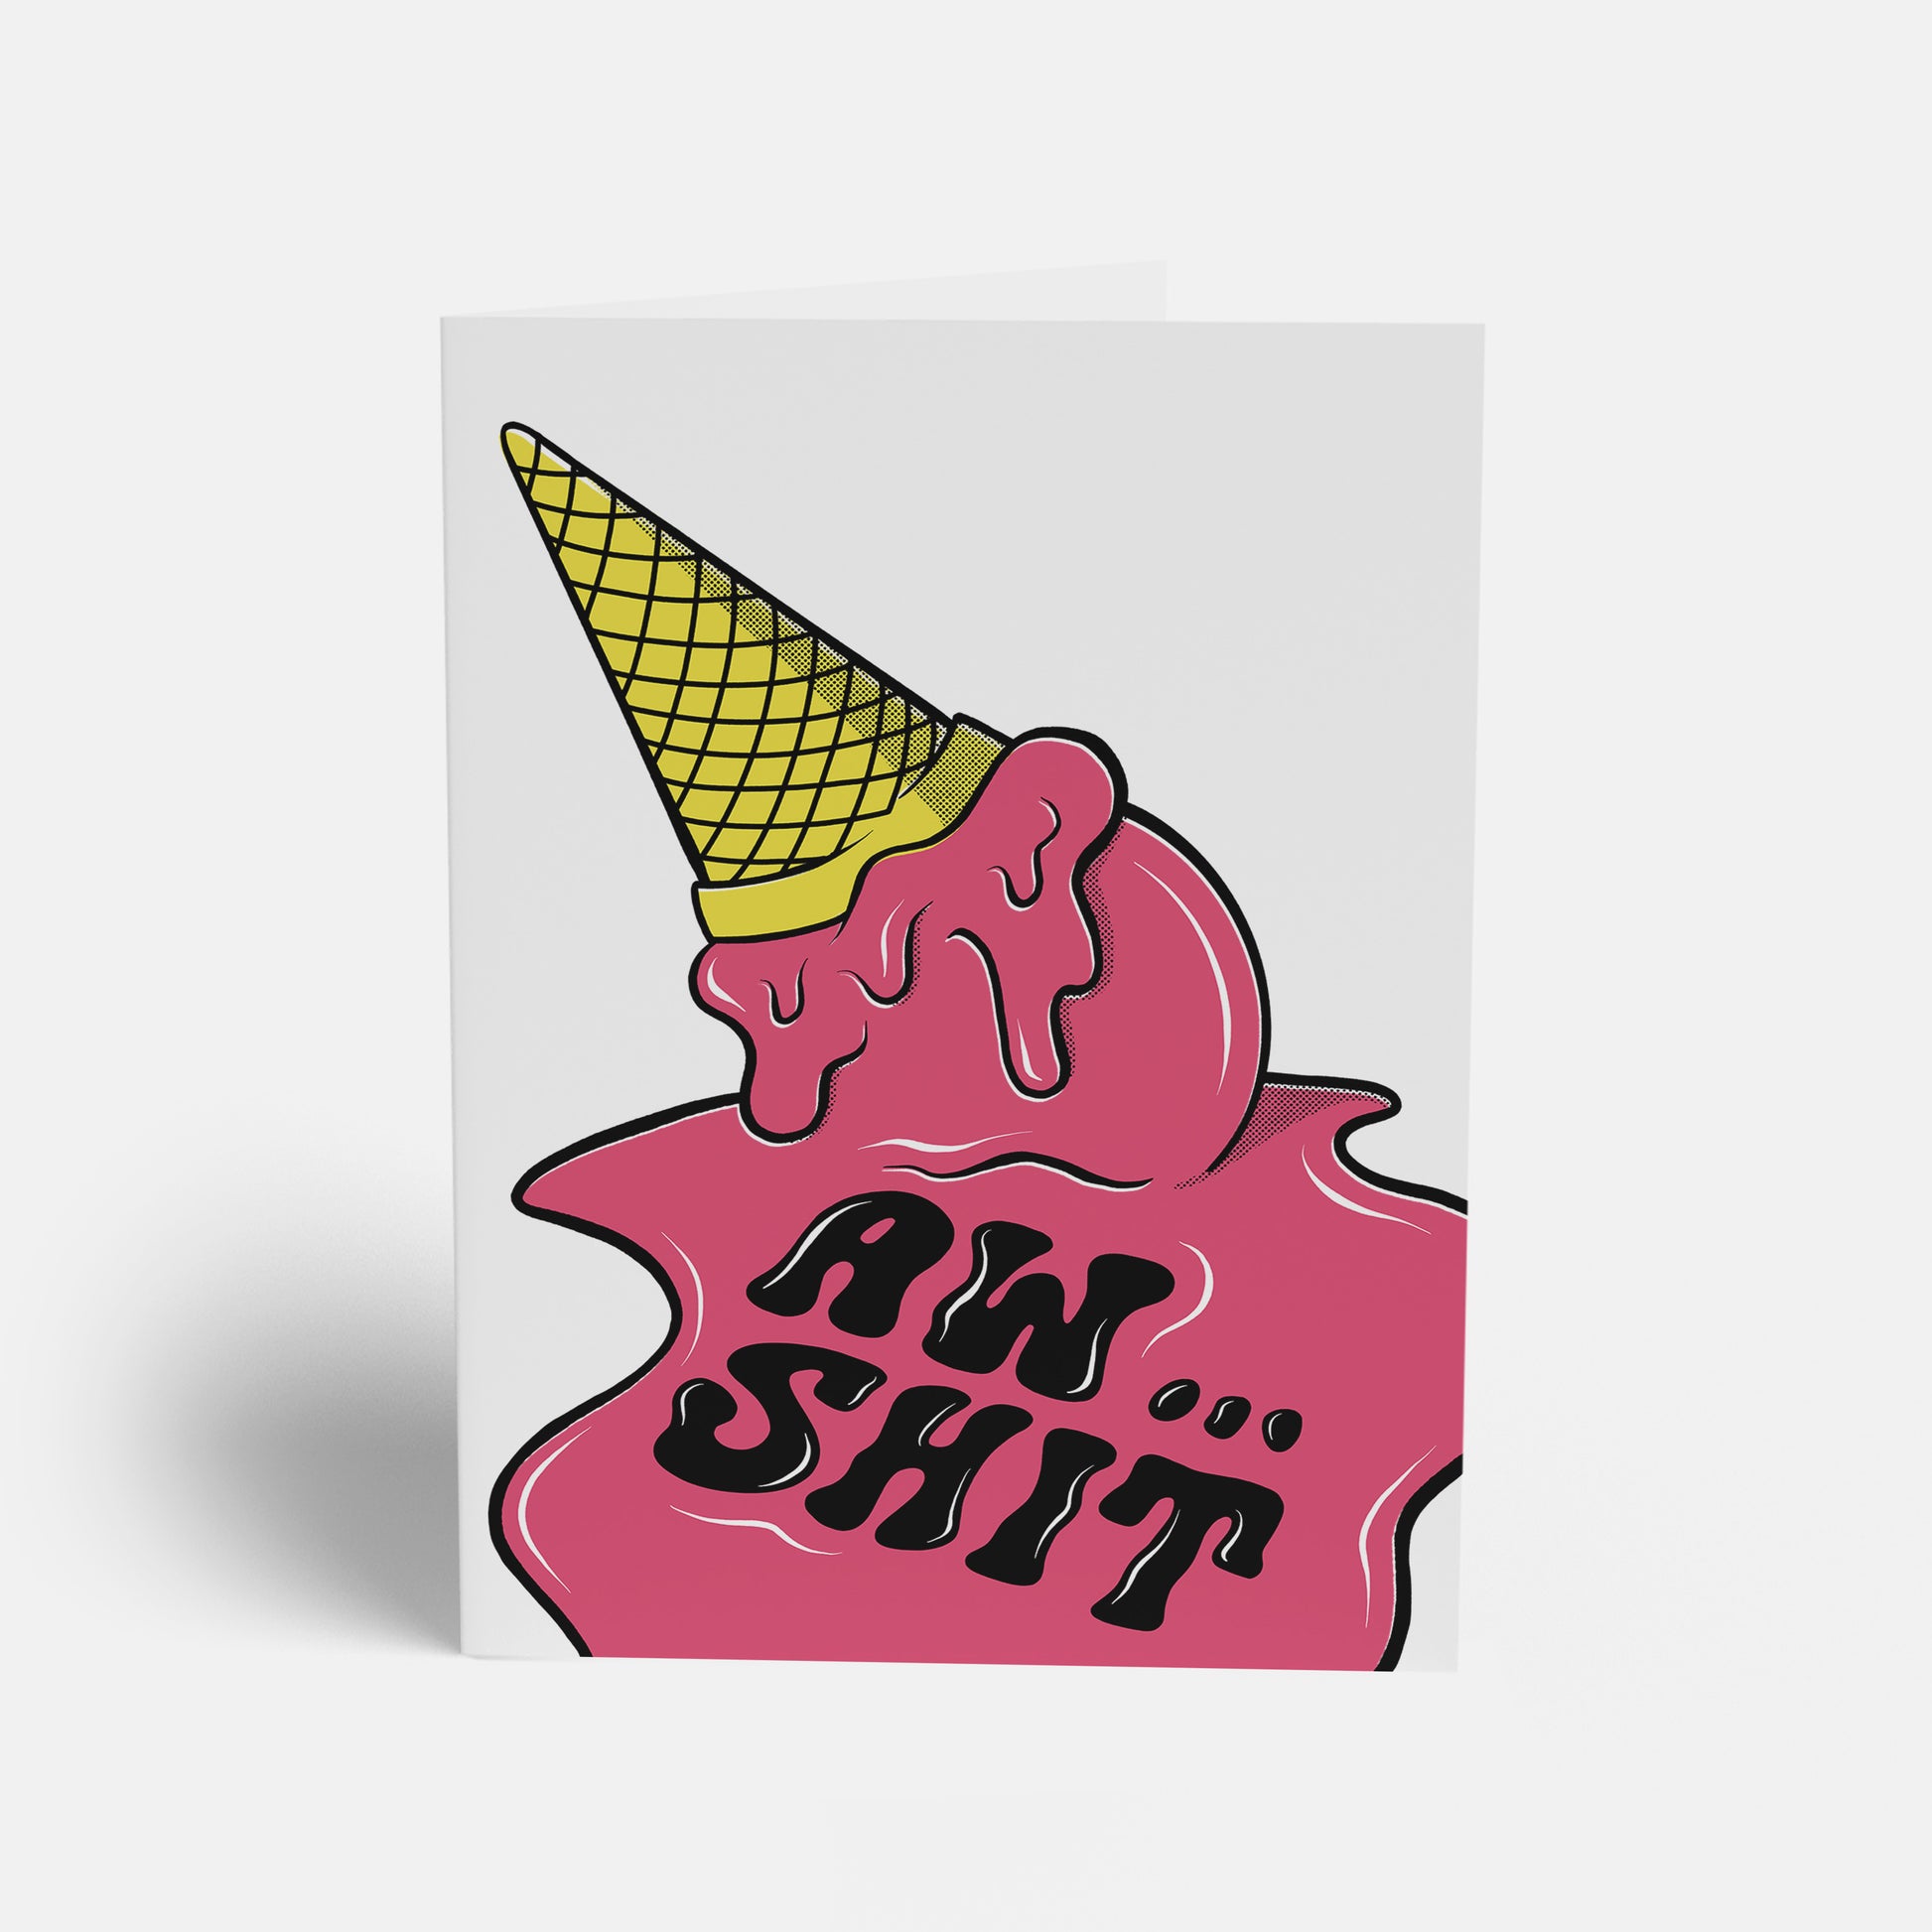 aw crap card with ice cream